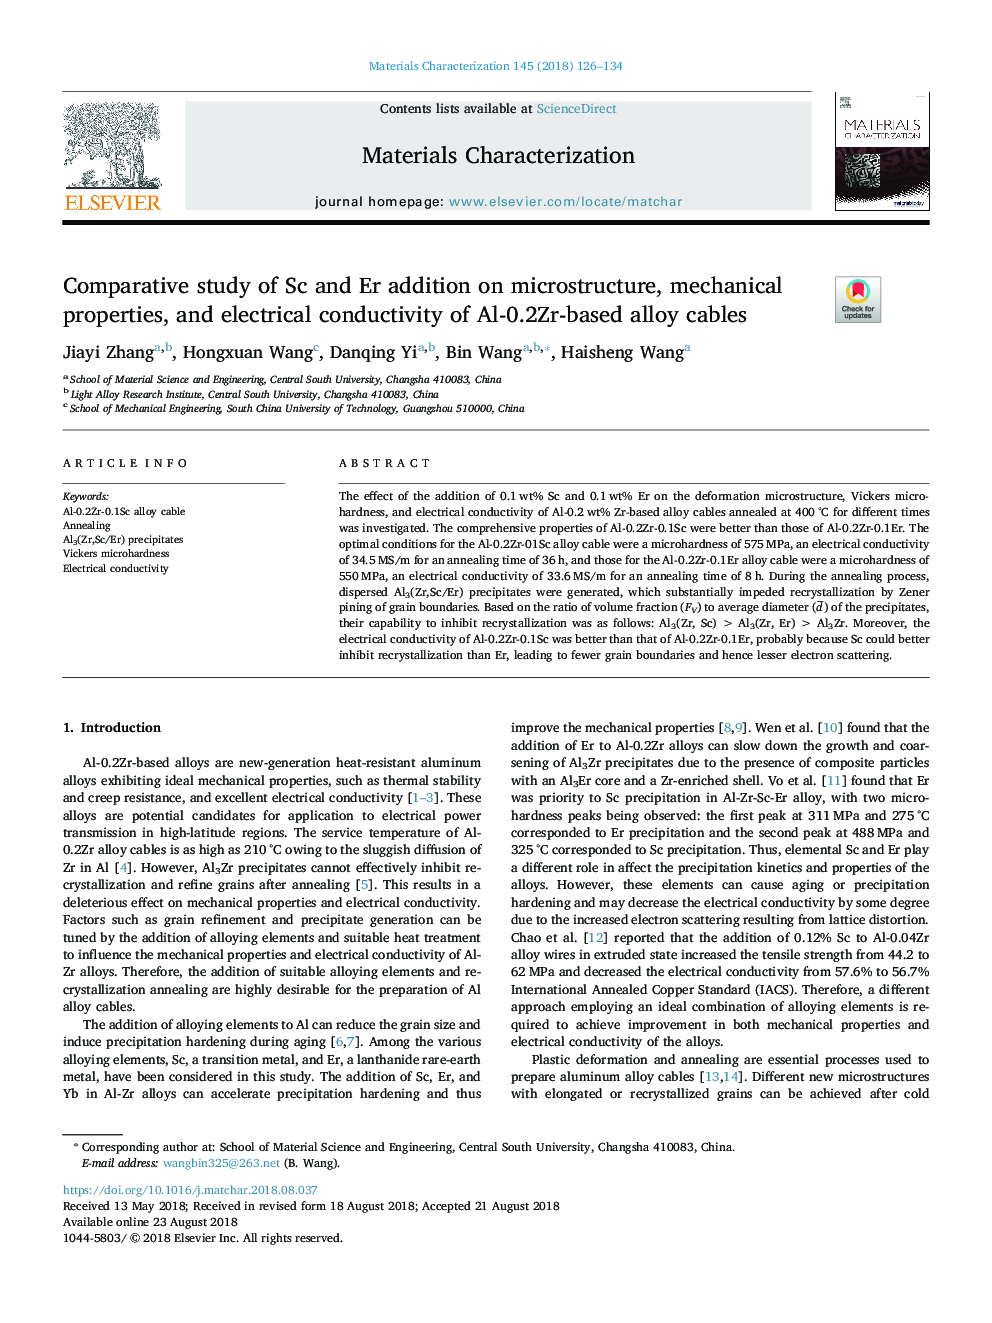 Comparative study of Sc and Er addition on microstructure, mechanical properties, and electrical conductivity of Al-0.2Zr-based alloy cables